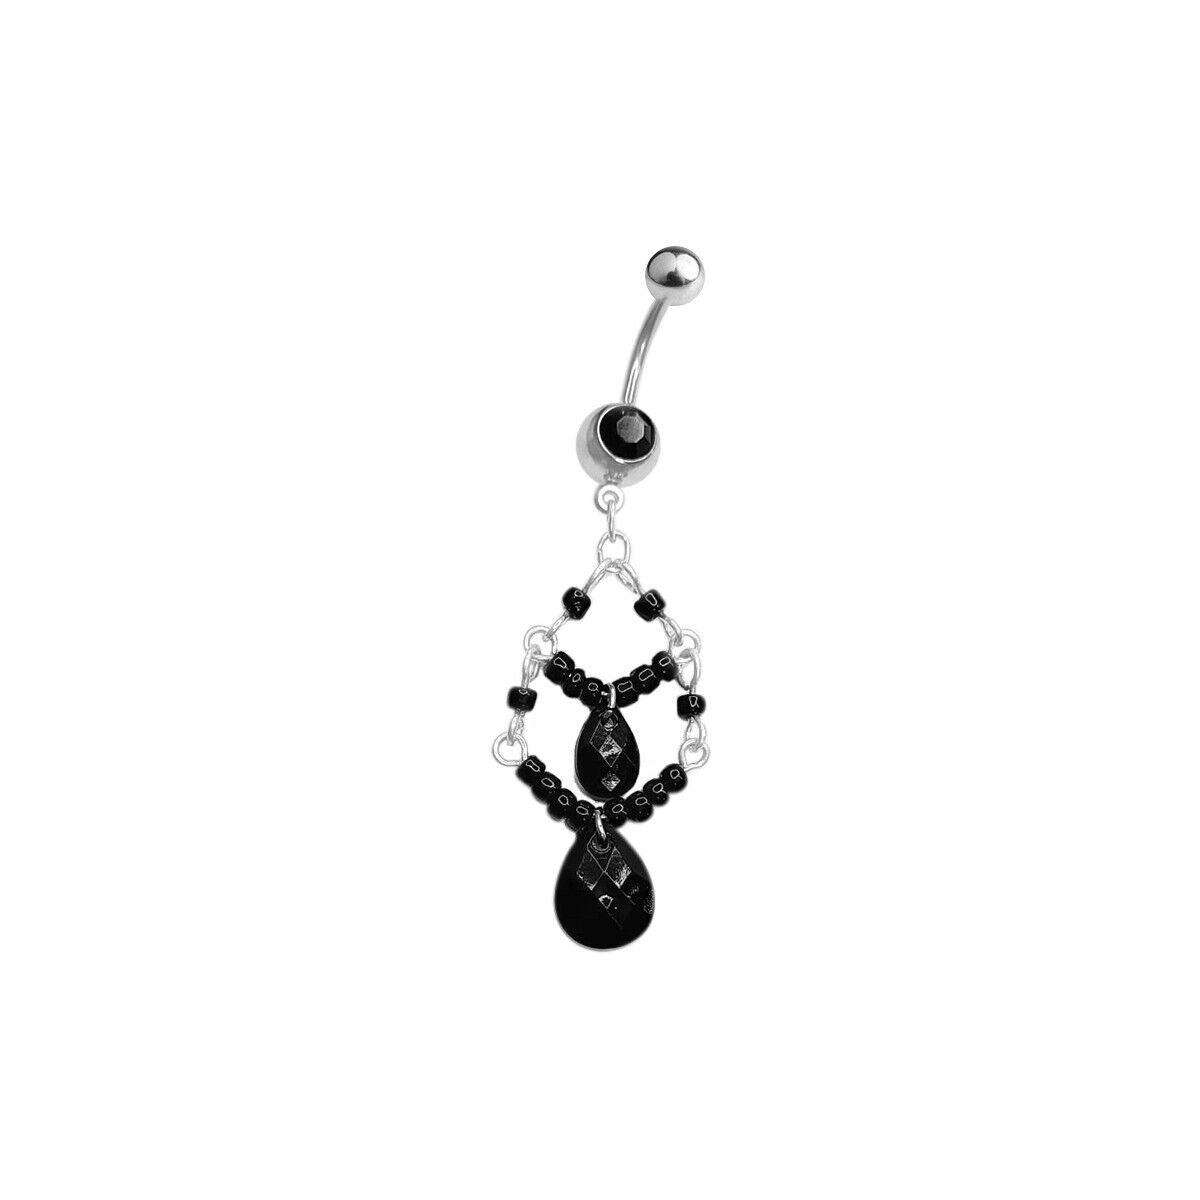 Belly Navel Ring Dangle with 2 Tiered Black Beads Gothic Art Deco Style 14G